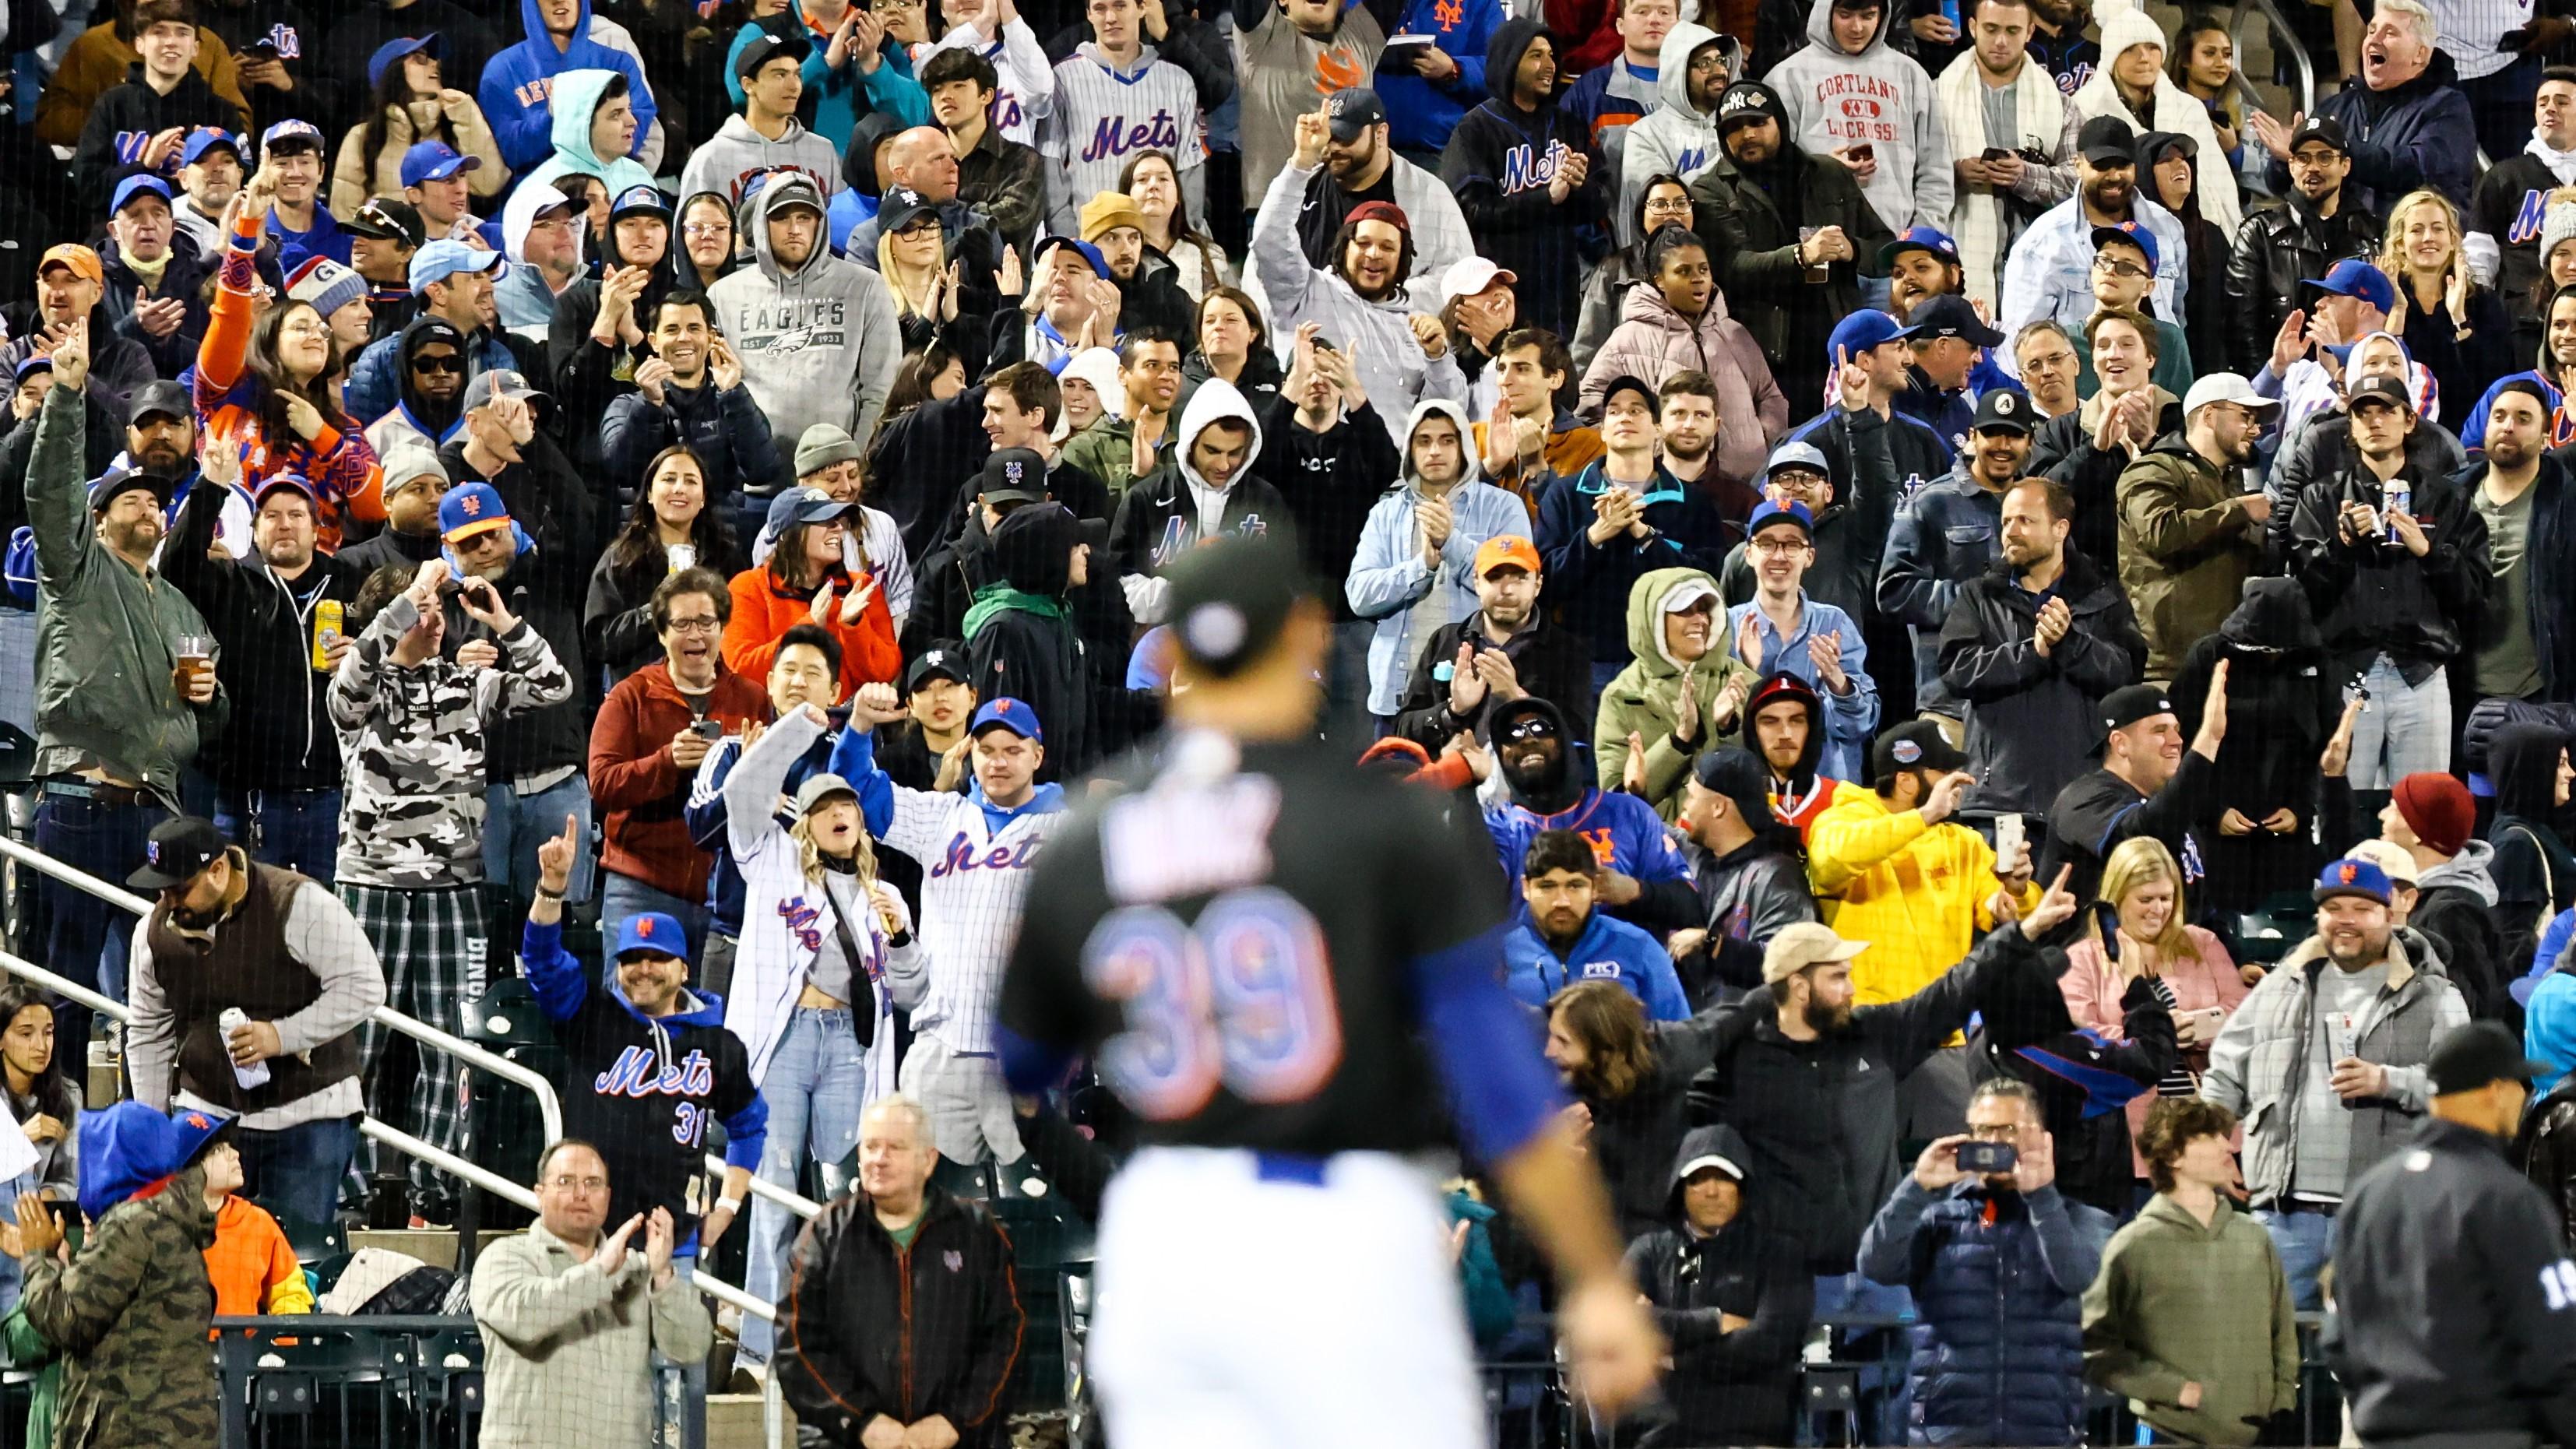 Apr 29, 2022; New York City, New York, USA; New York Mets fans cheer on New York Mets relief pitcher Edwin Diaz (39) in anticipation of a combined no-hitter against the Philadelphia Phillies during the ninth inning at Citi Field. / Jessica Alcheh-USA TODAY Sports